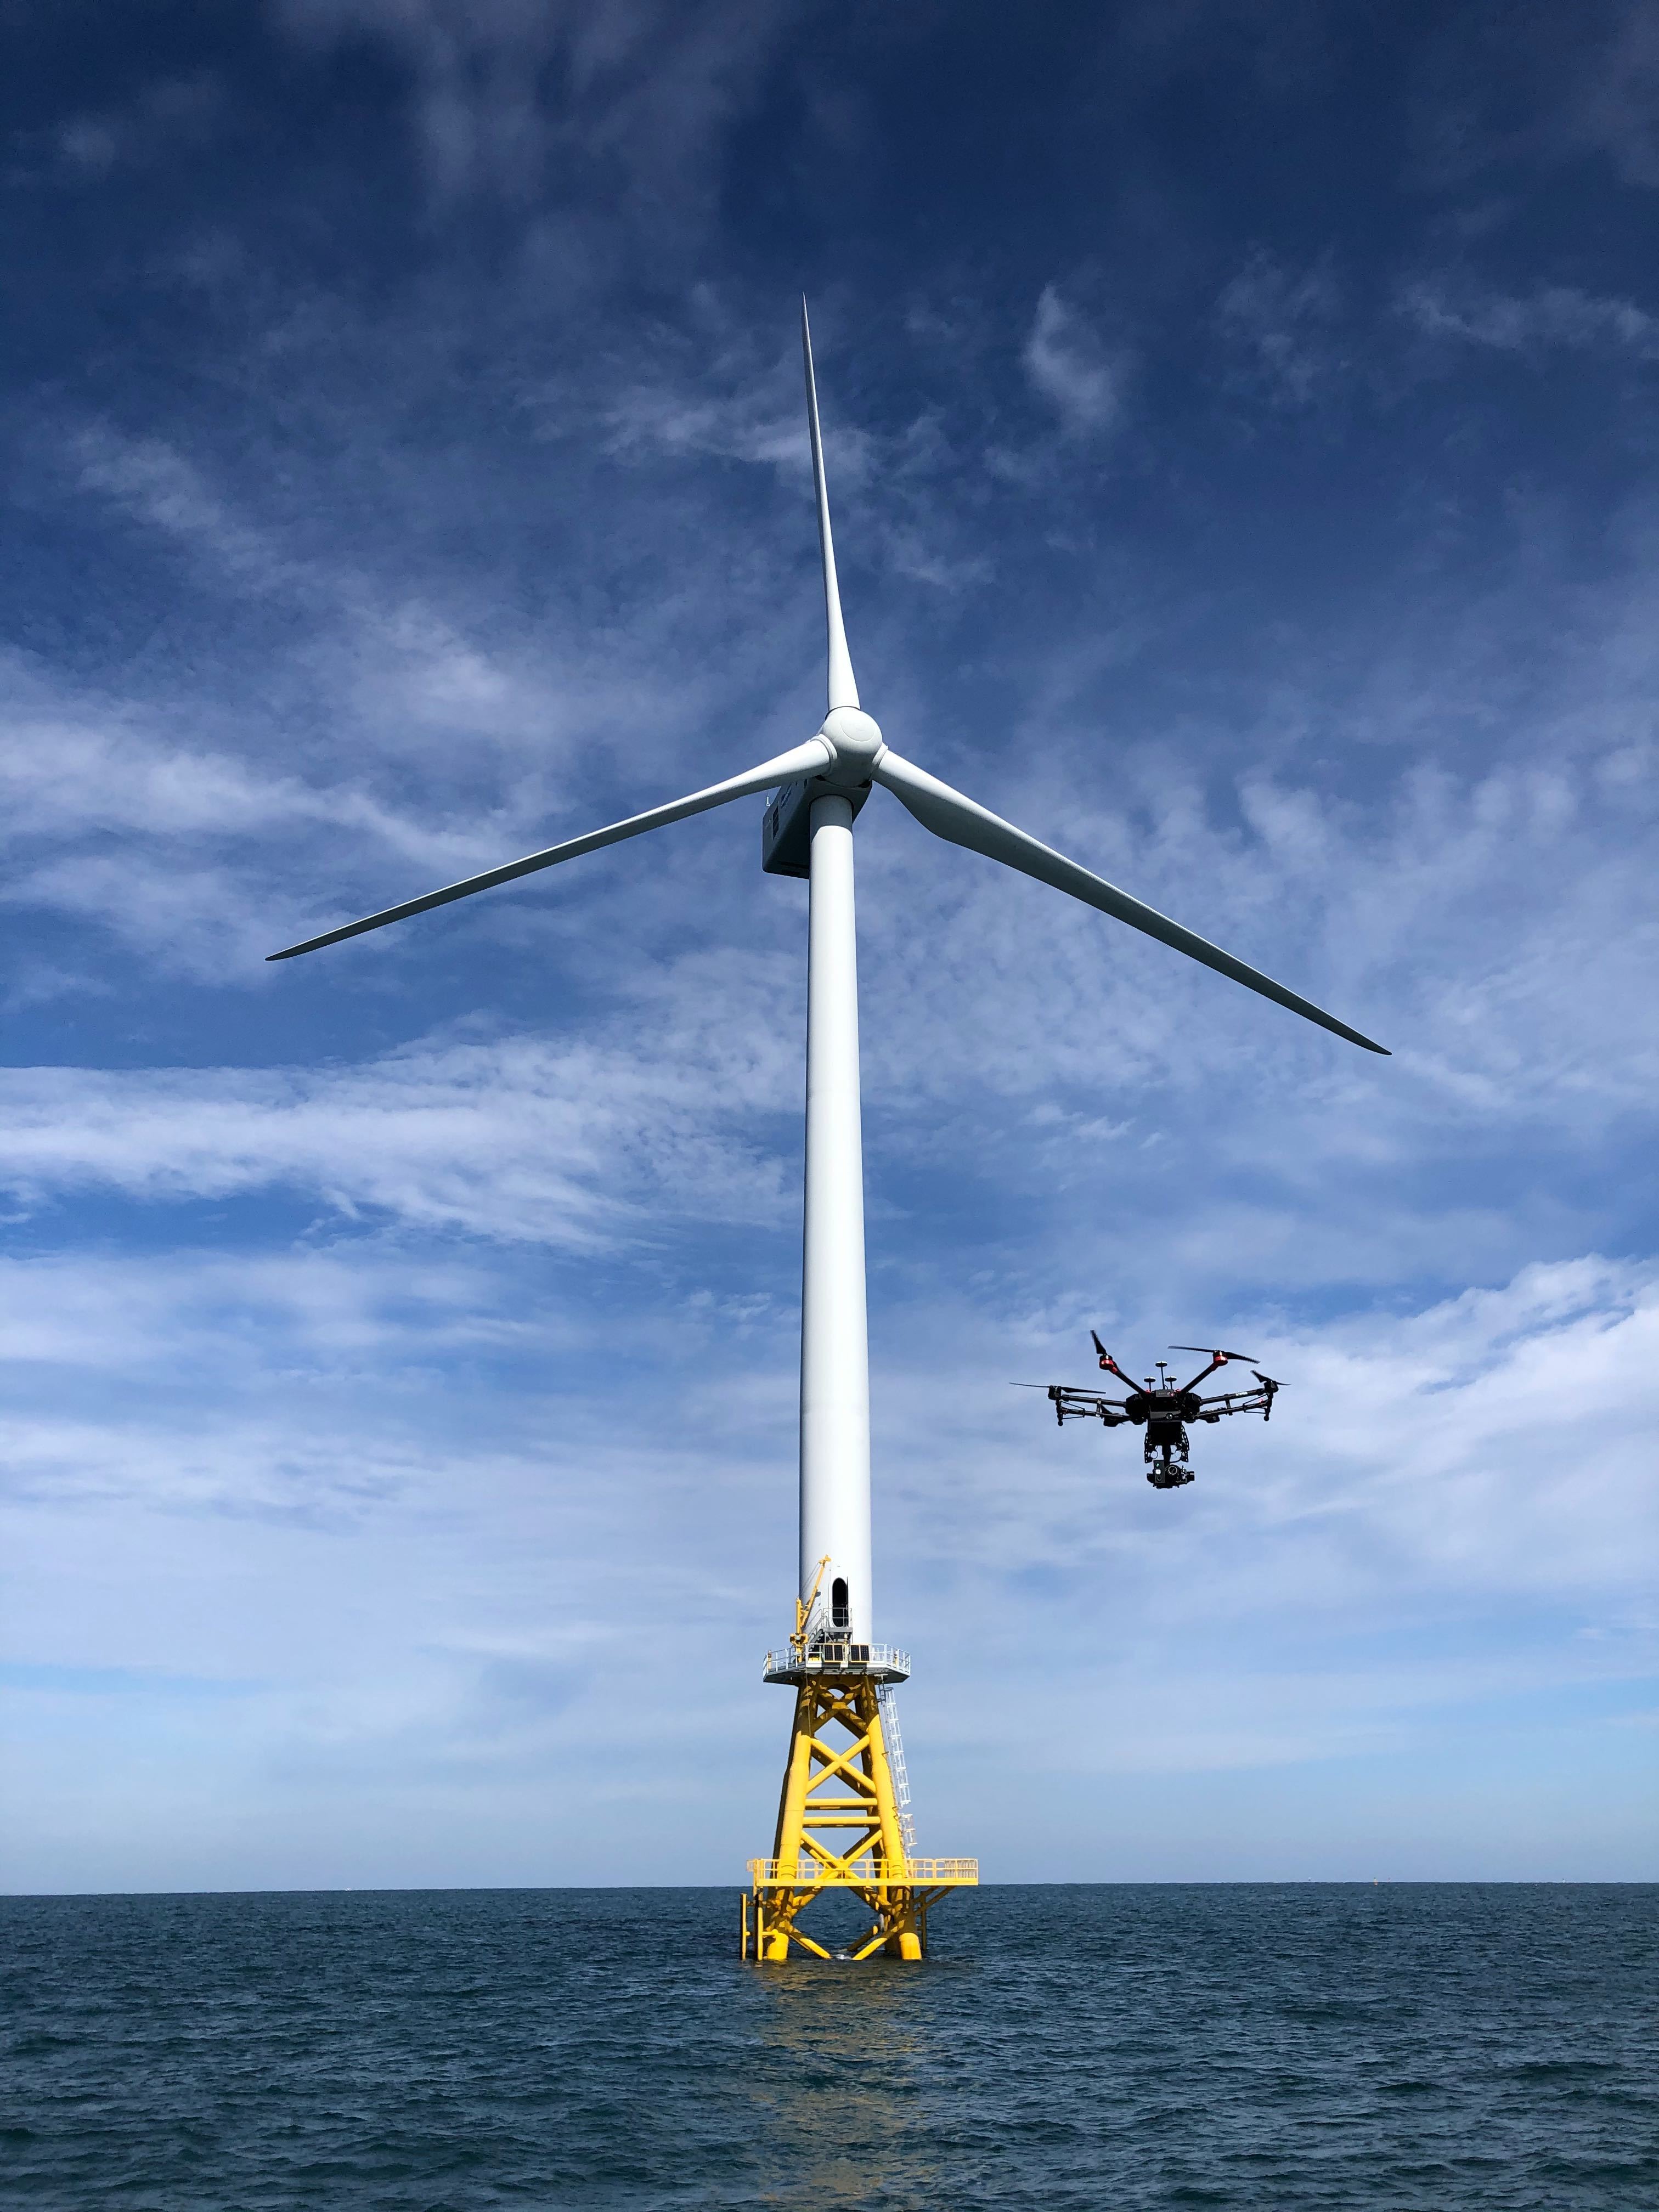 relates to How Drones Help Workers Inspect Wind Turbines